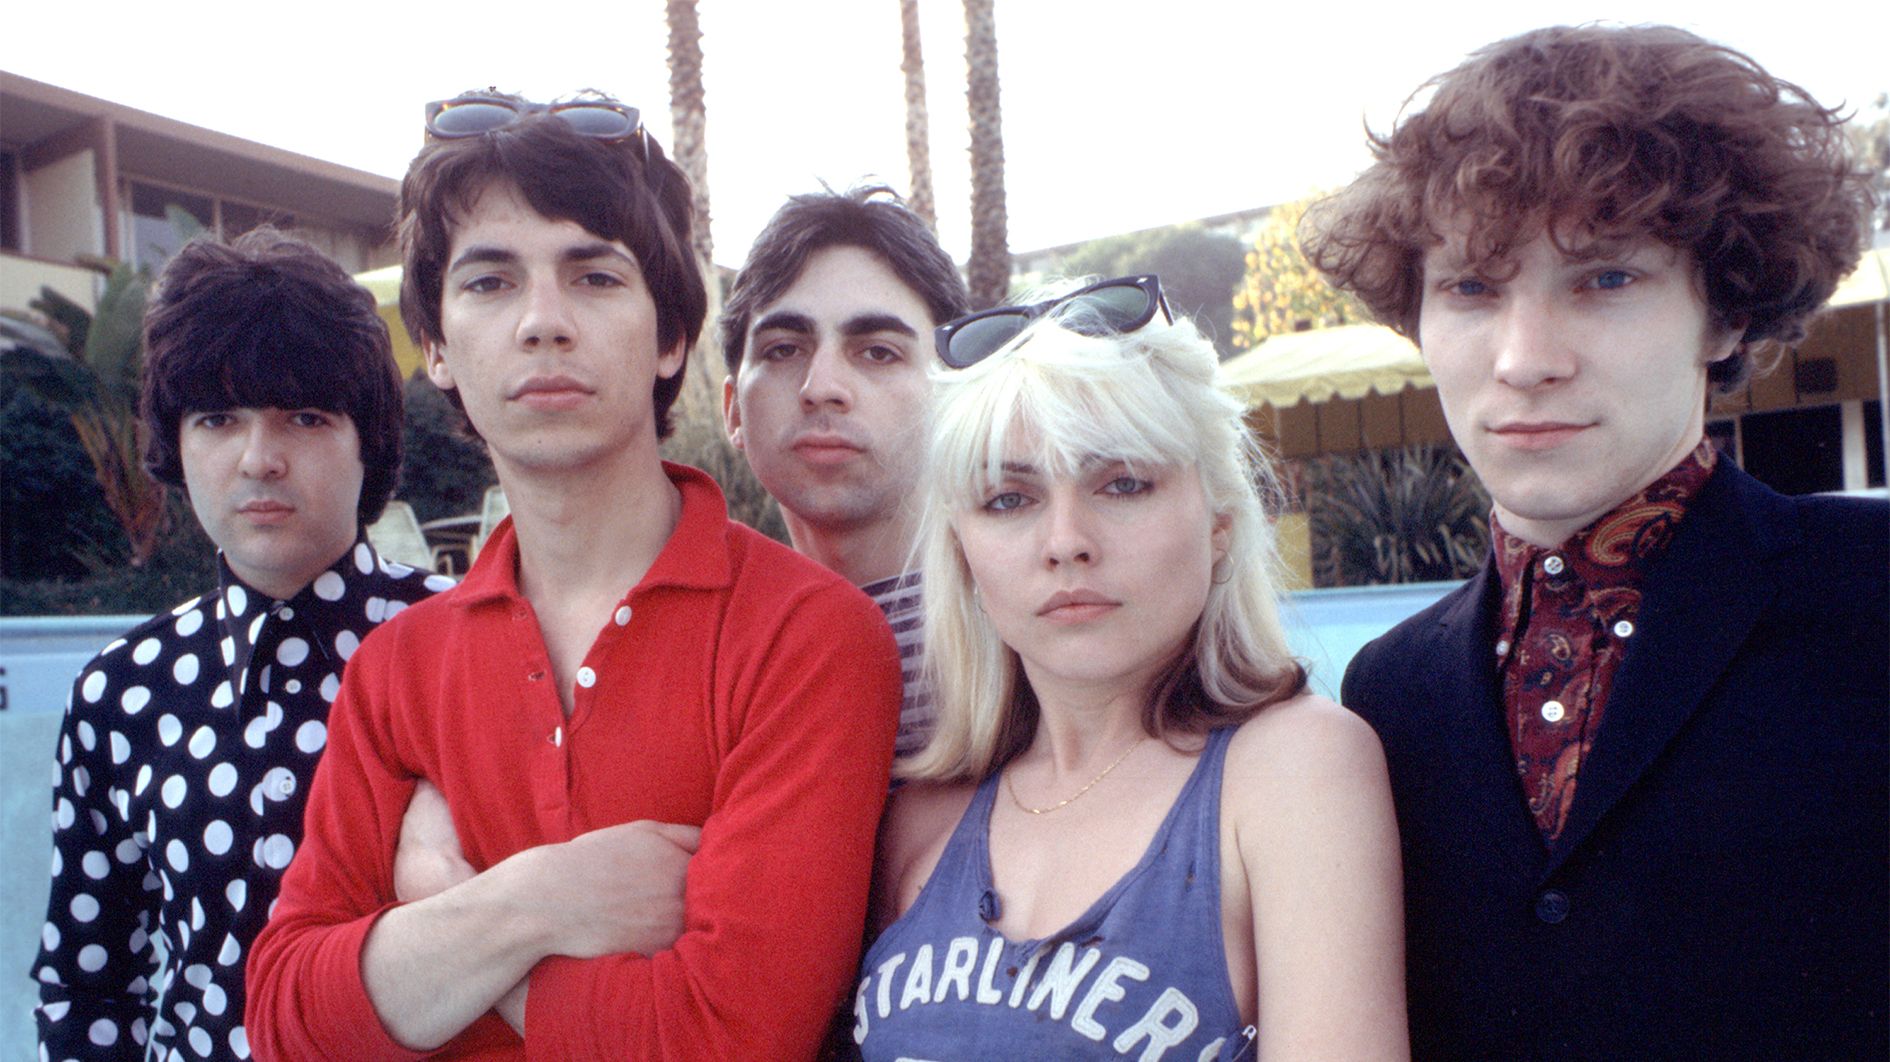 11 of the most successful Blondie songs of all time